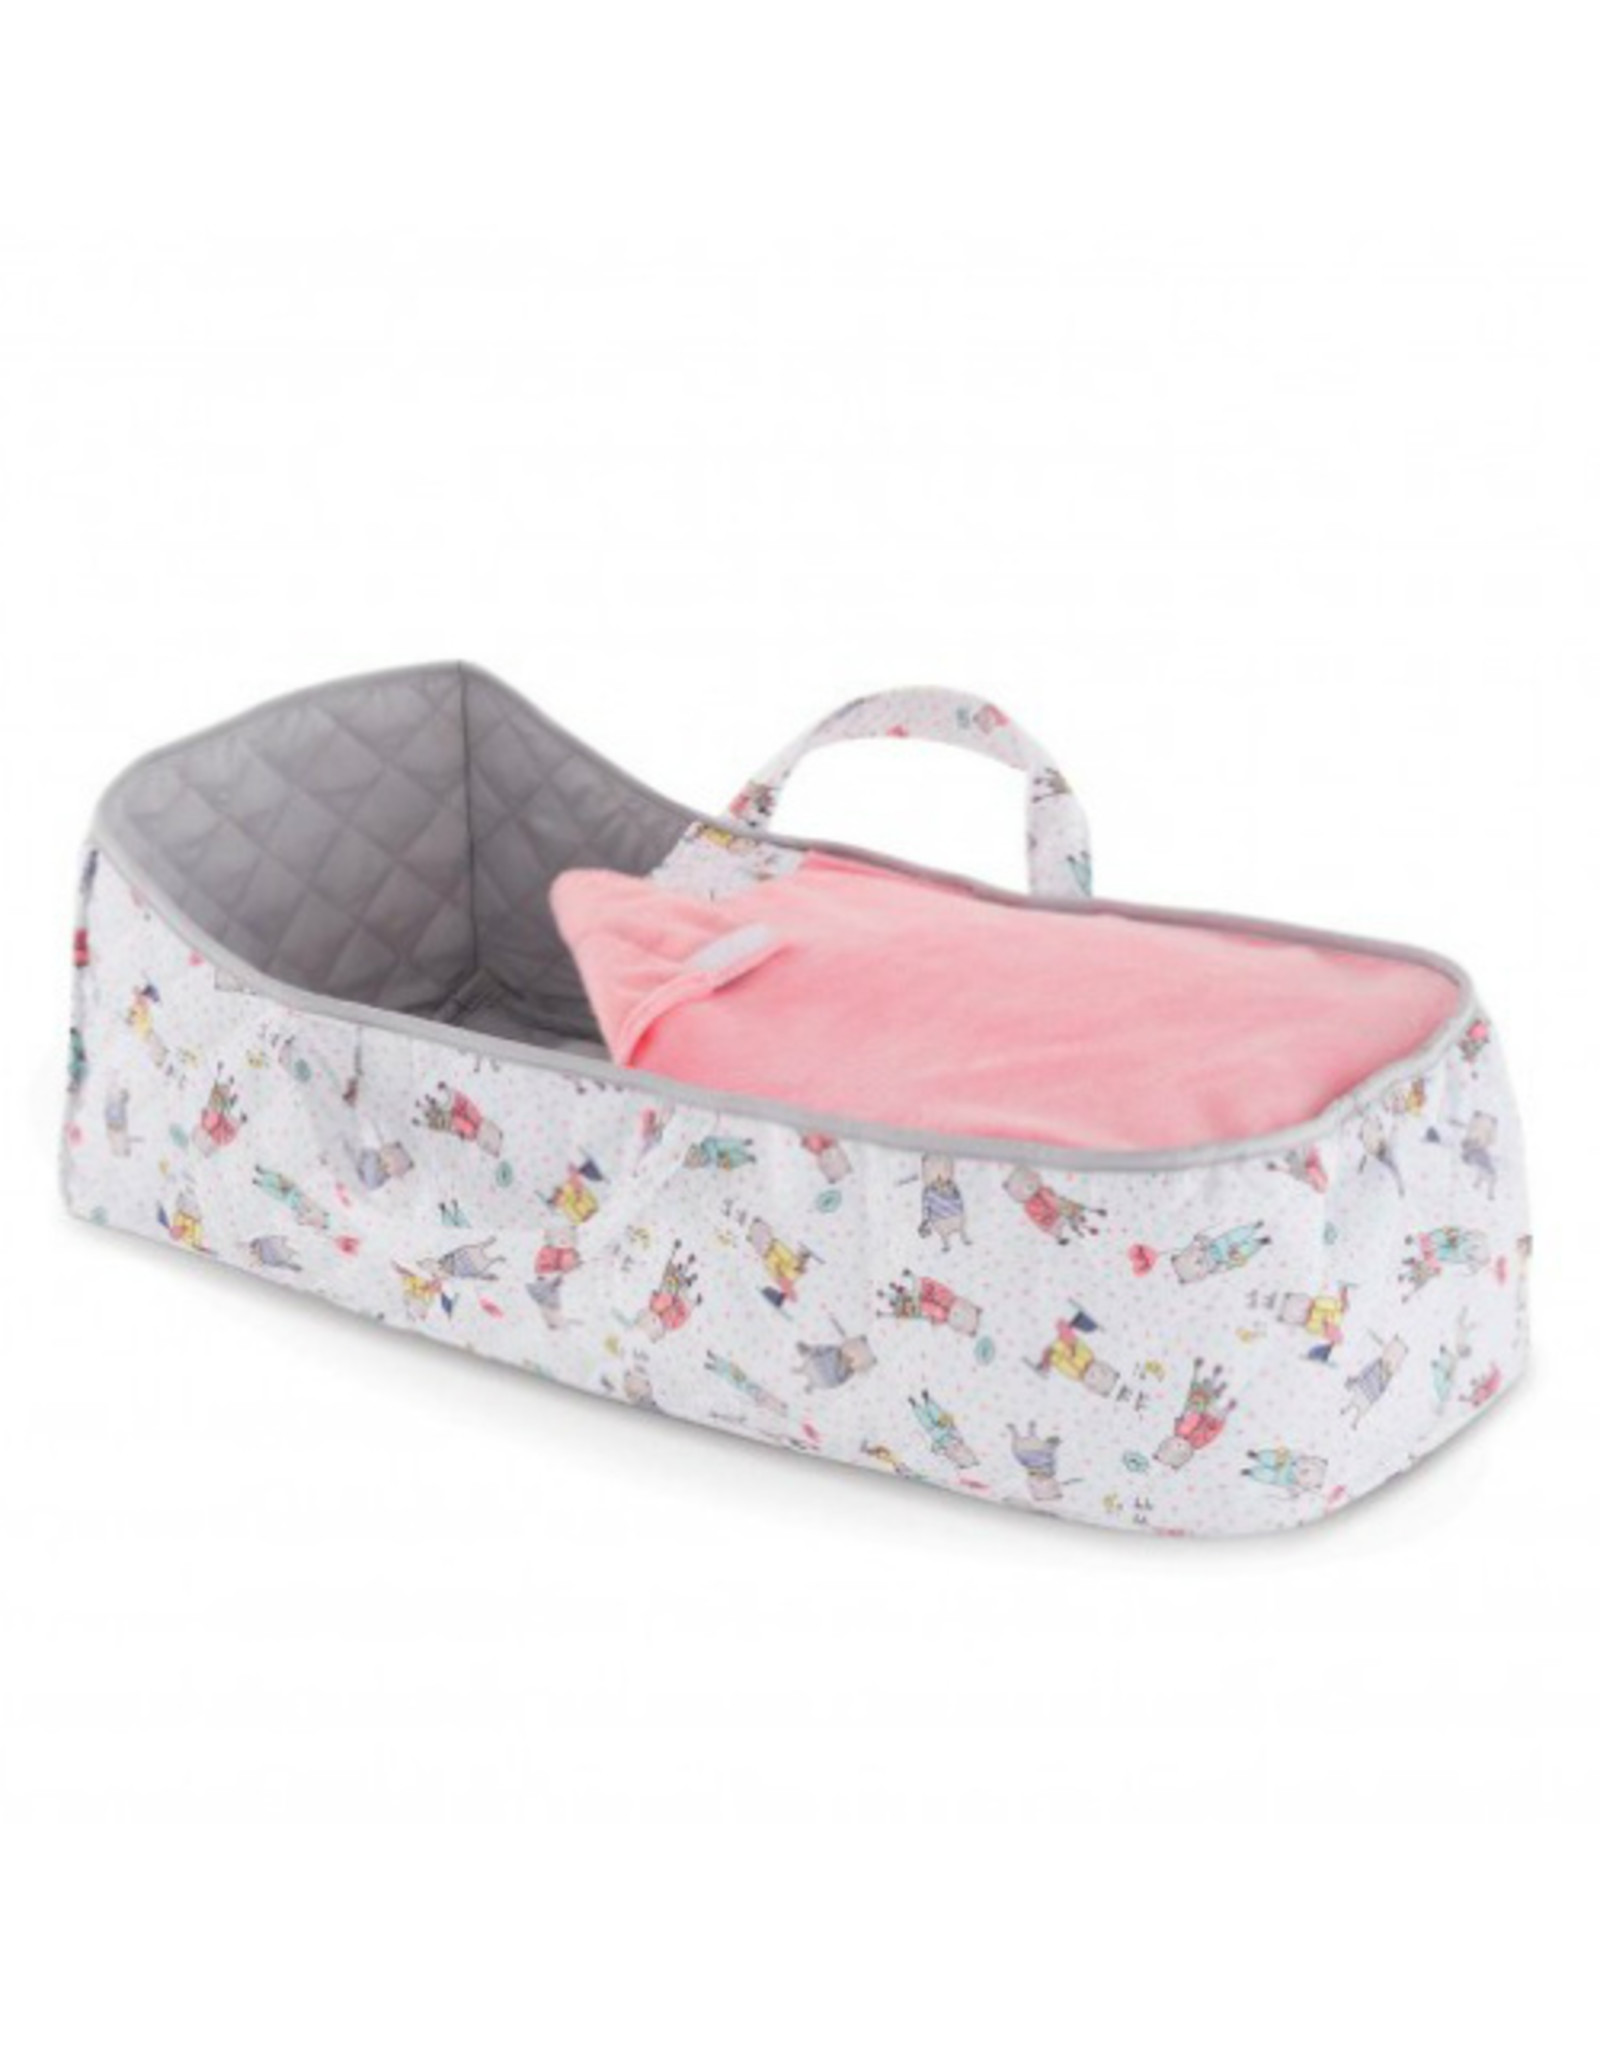 Corolle BB14'' & 17" Carry Bed  (fabric/colors may vary)